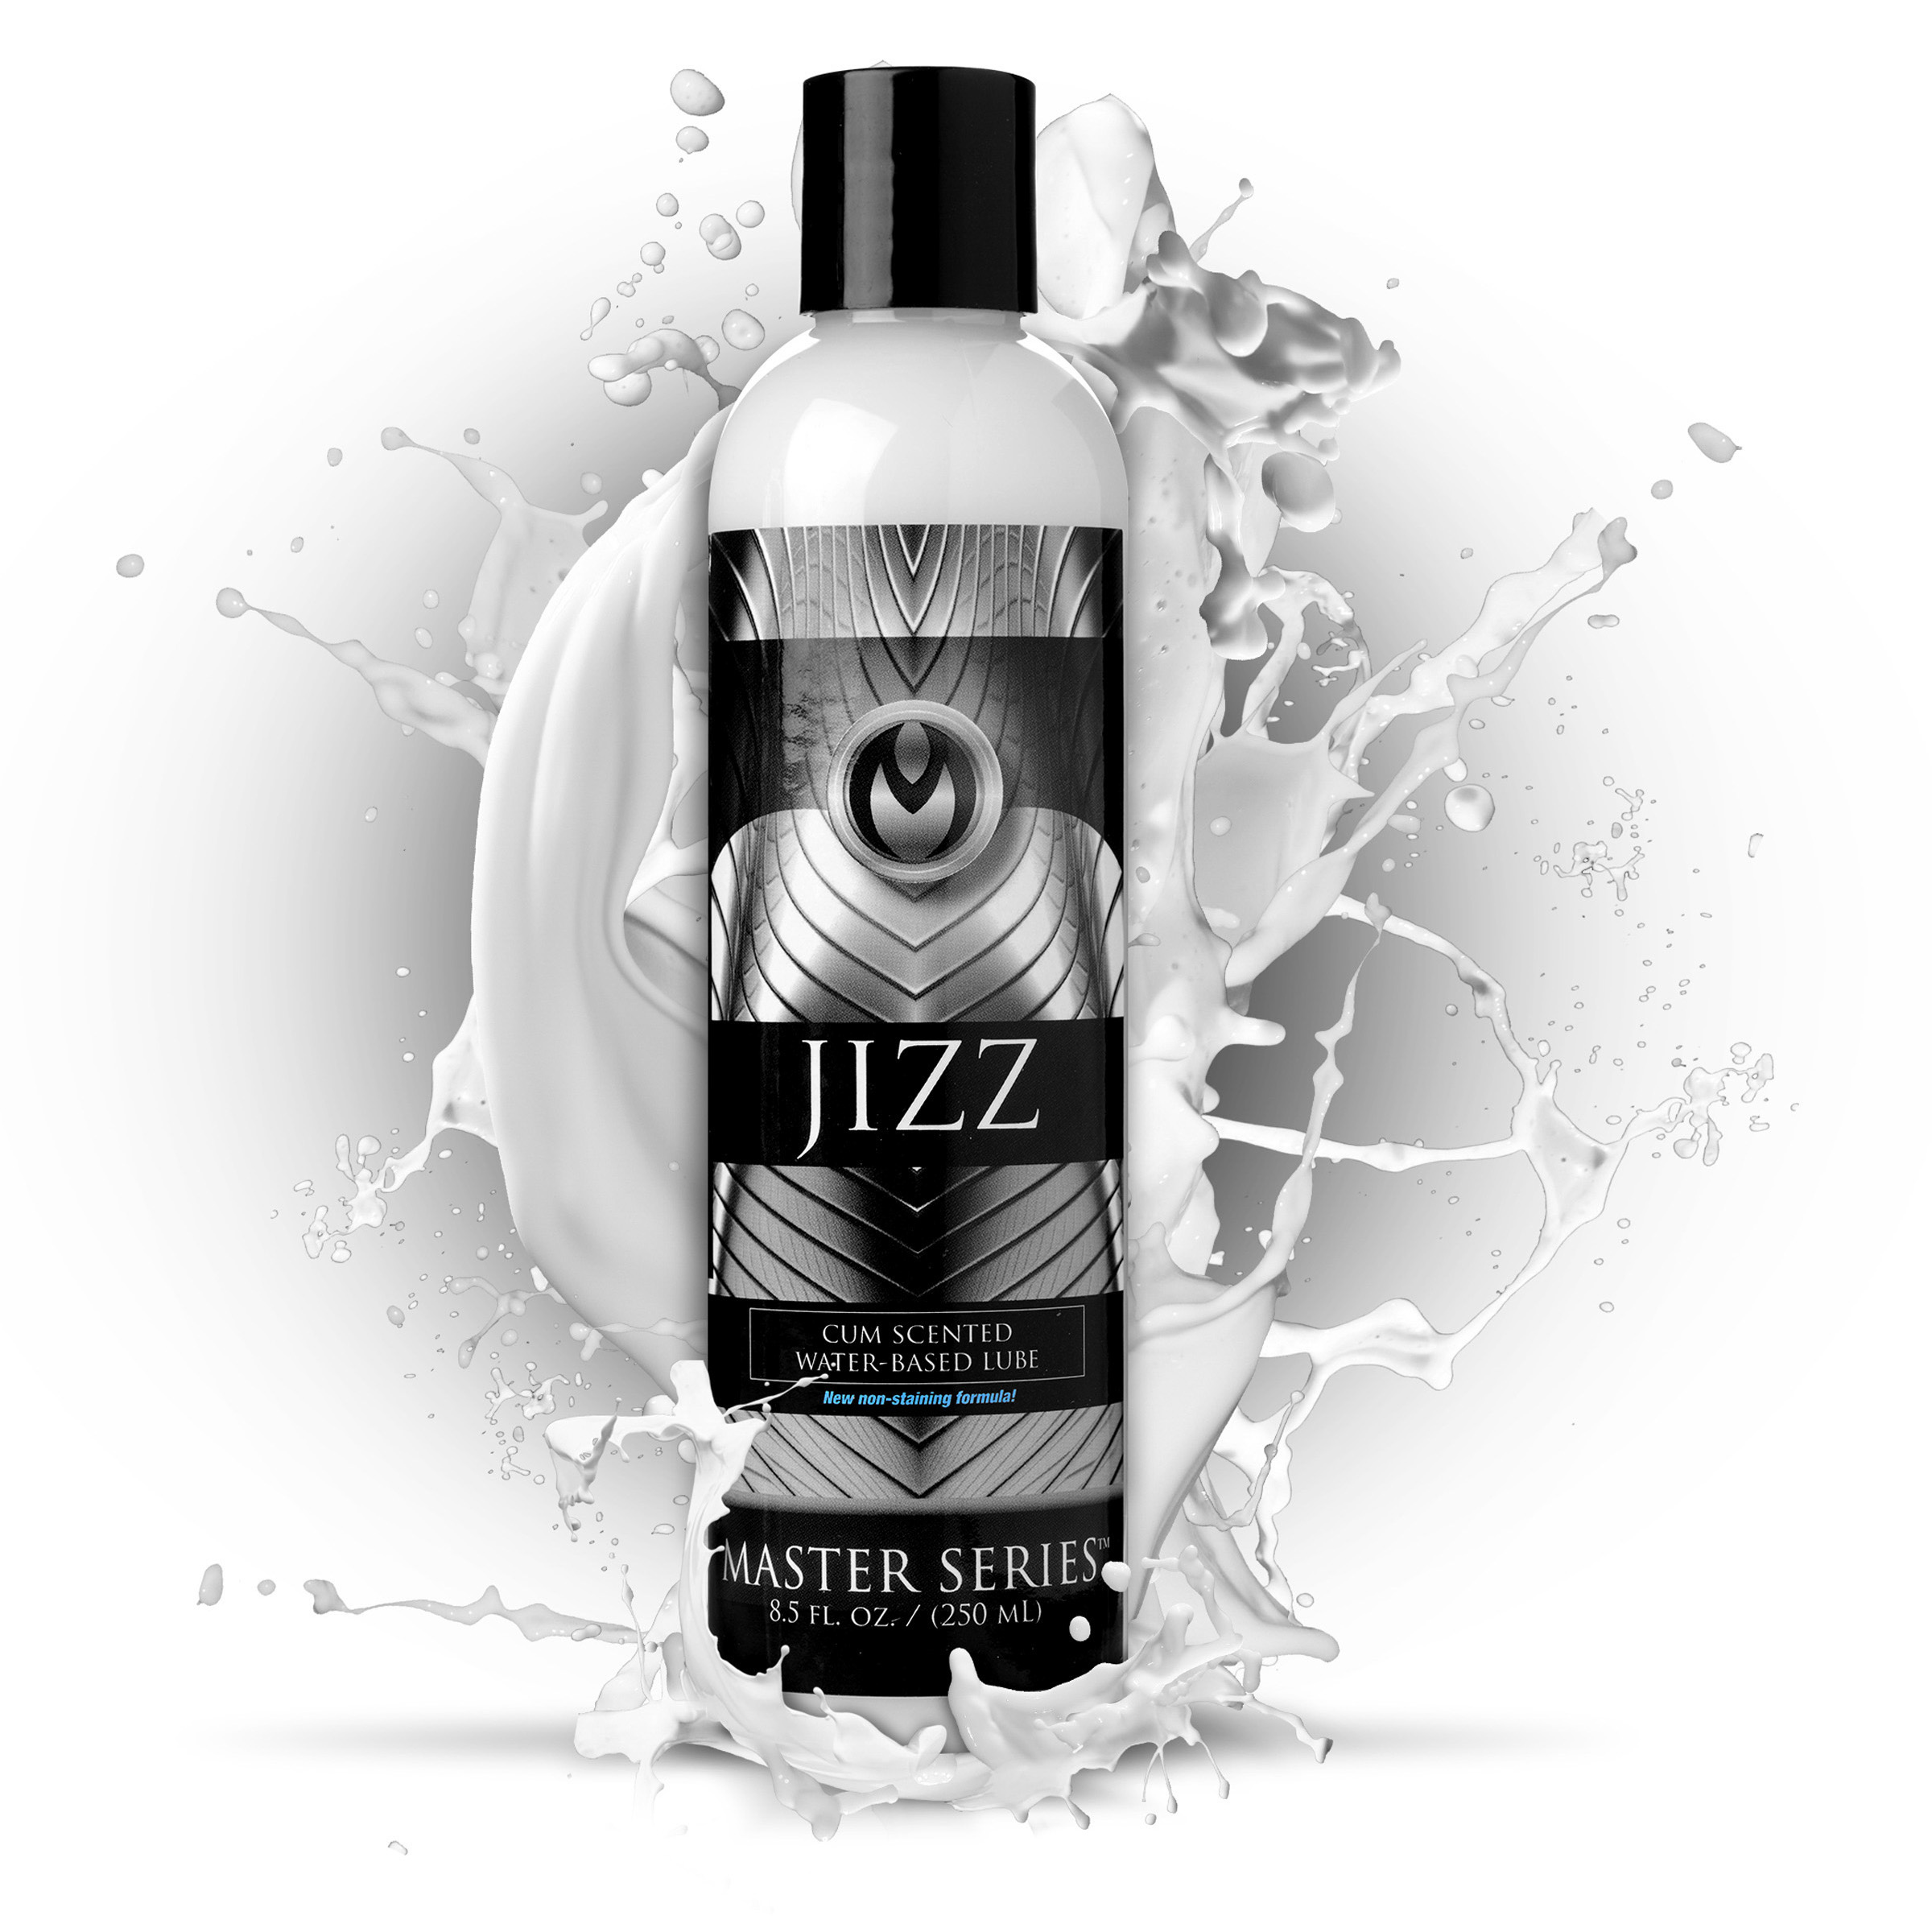 Jizz+Water+Based+Cum+Scented+Lube+-+8.5+oz